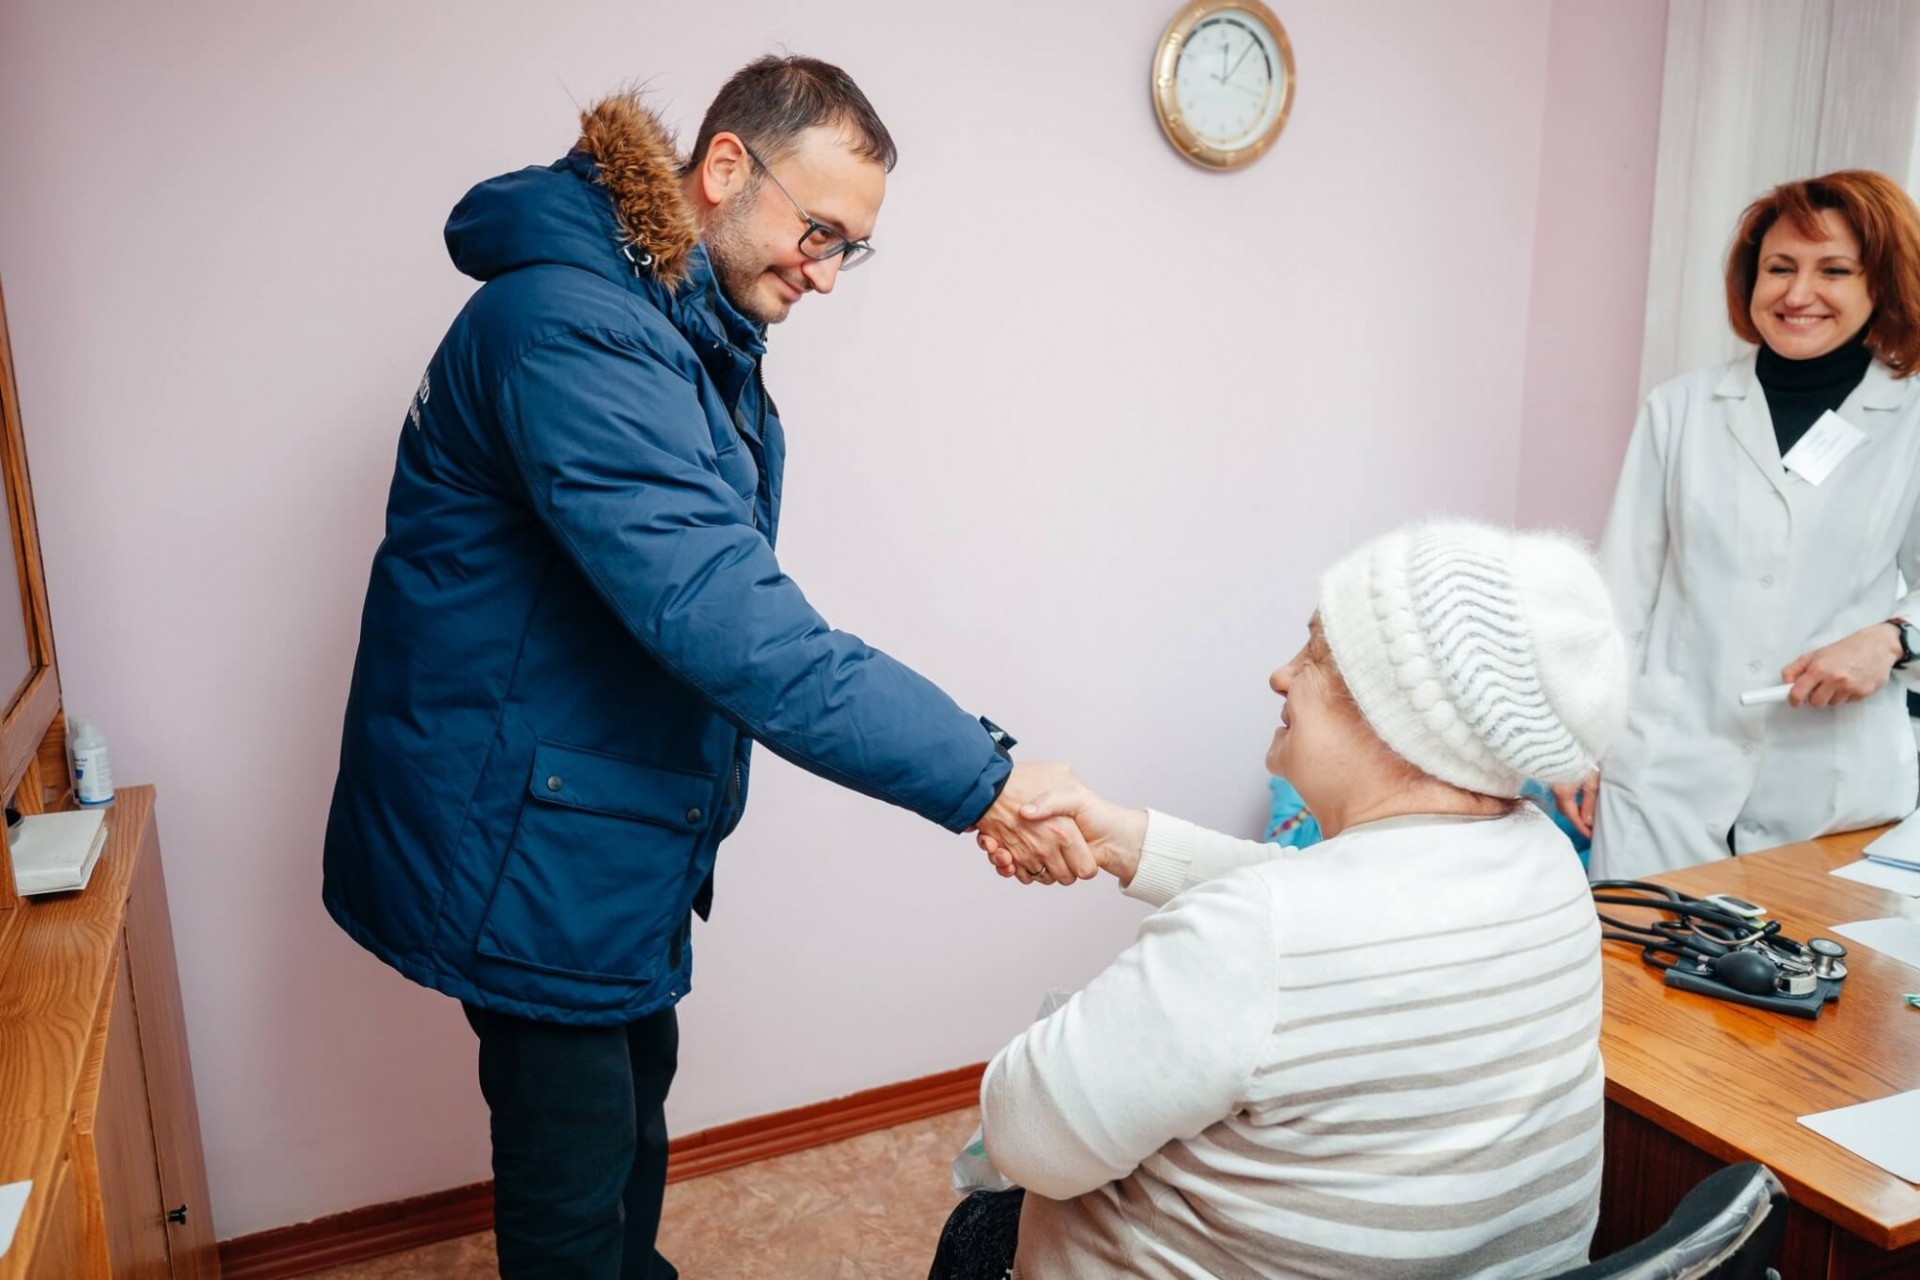 A meeting between Dr. Habicht and a patient. Source: WHO Ukraine 